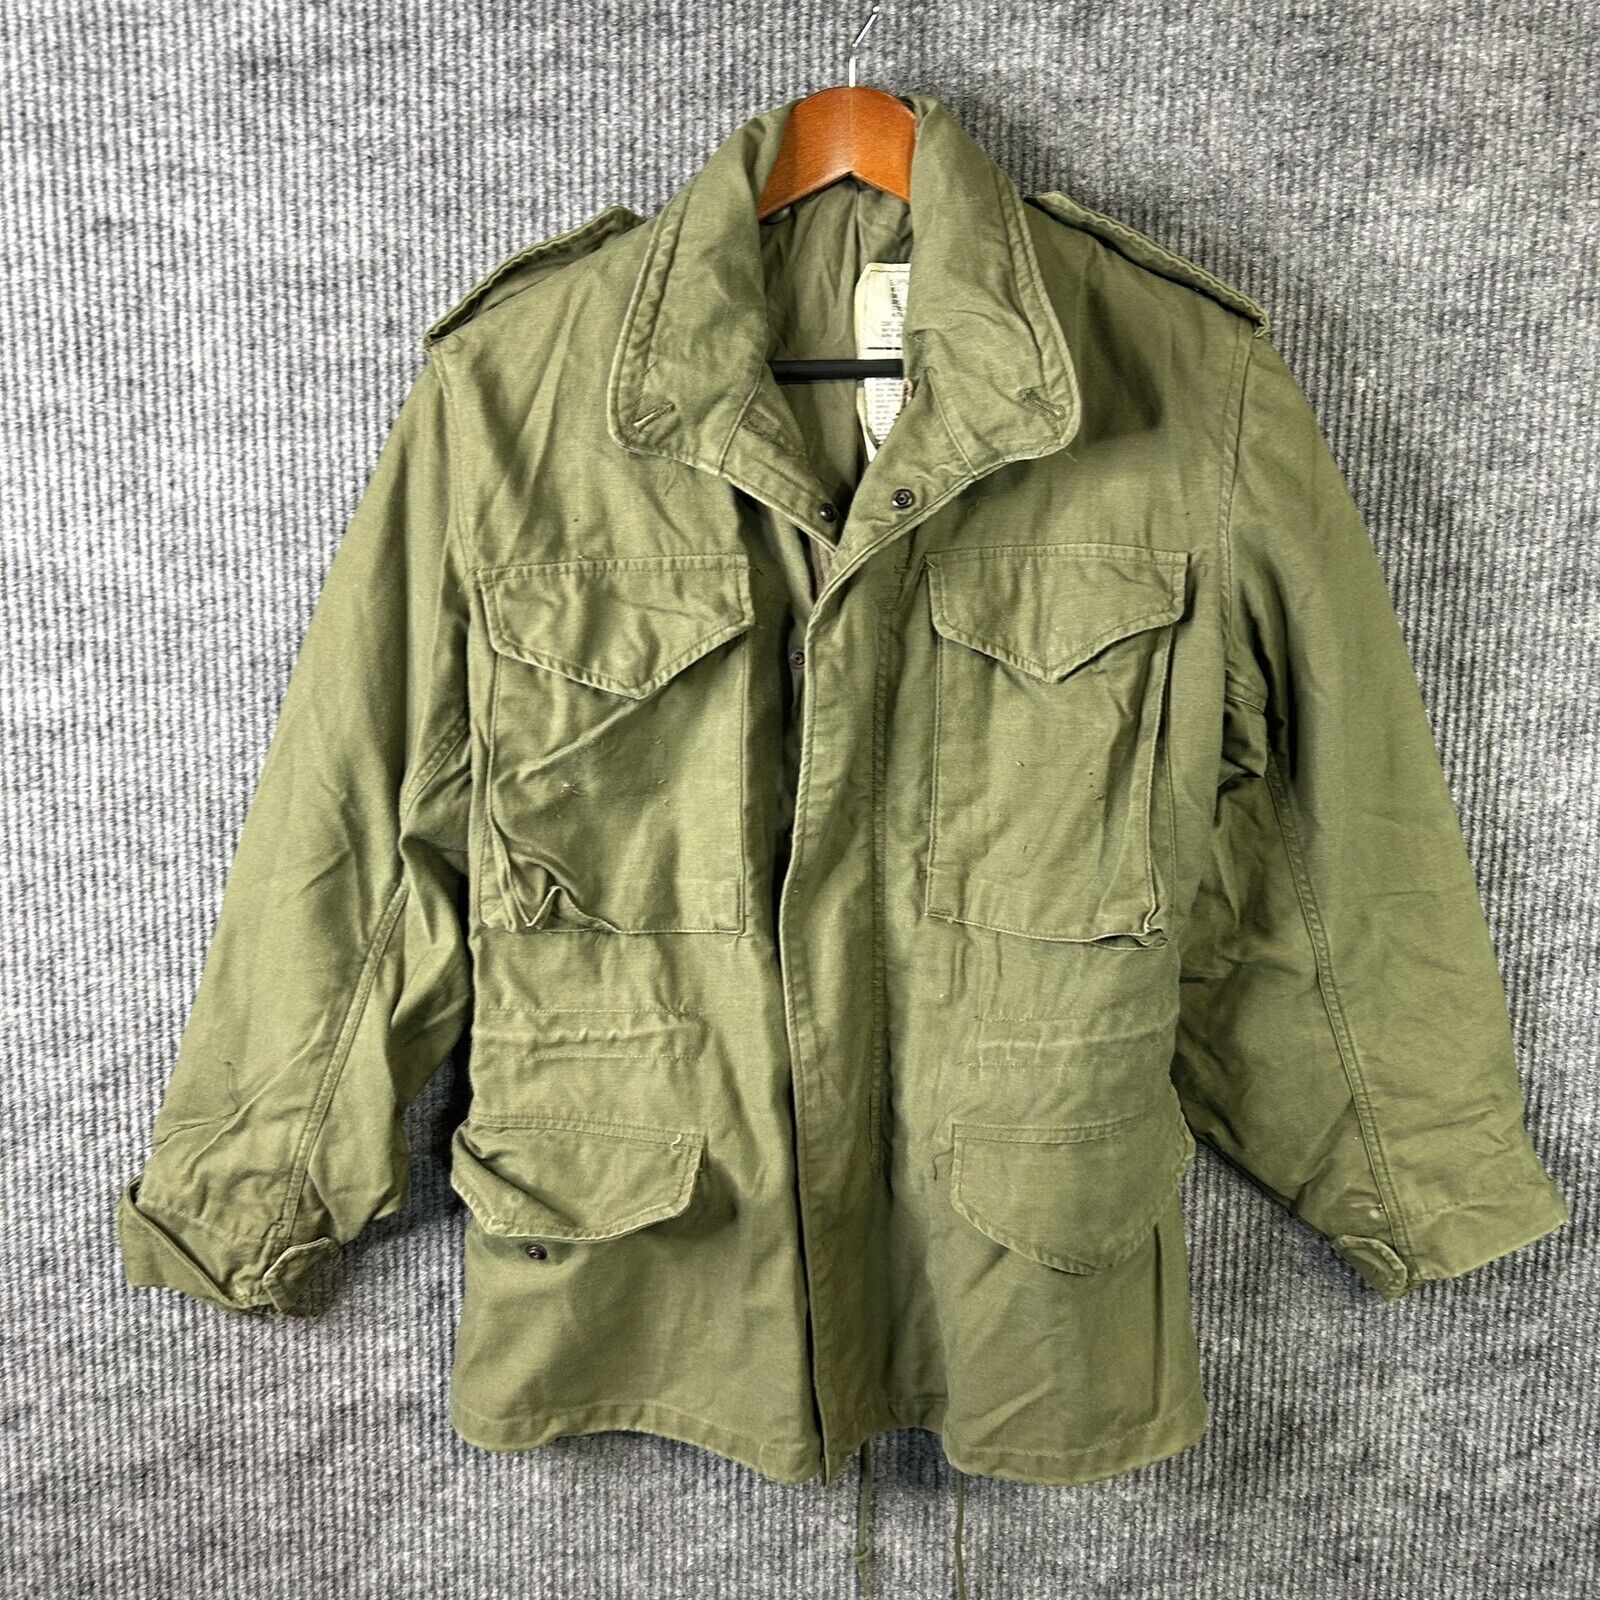 Vintage US Military M65 Cold Weather Field Coat Jacket Size X Small Short